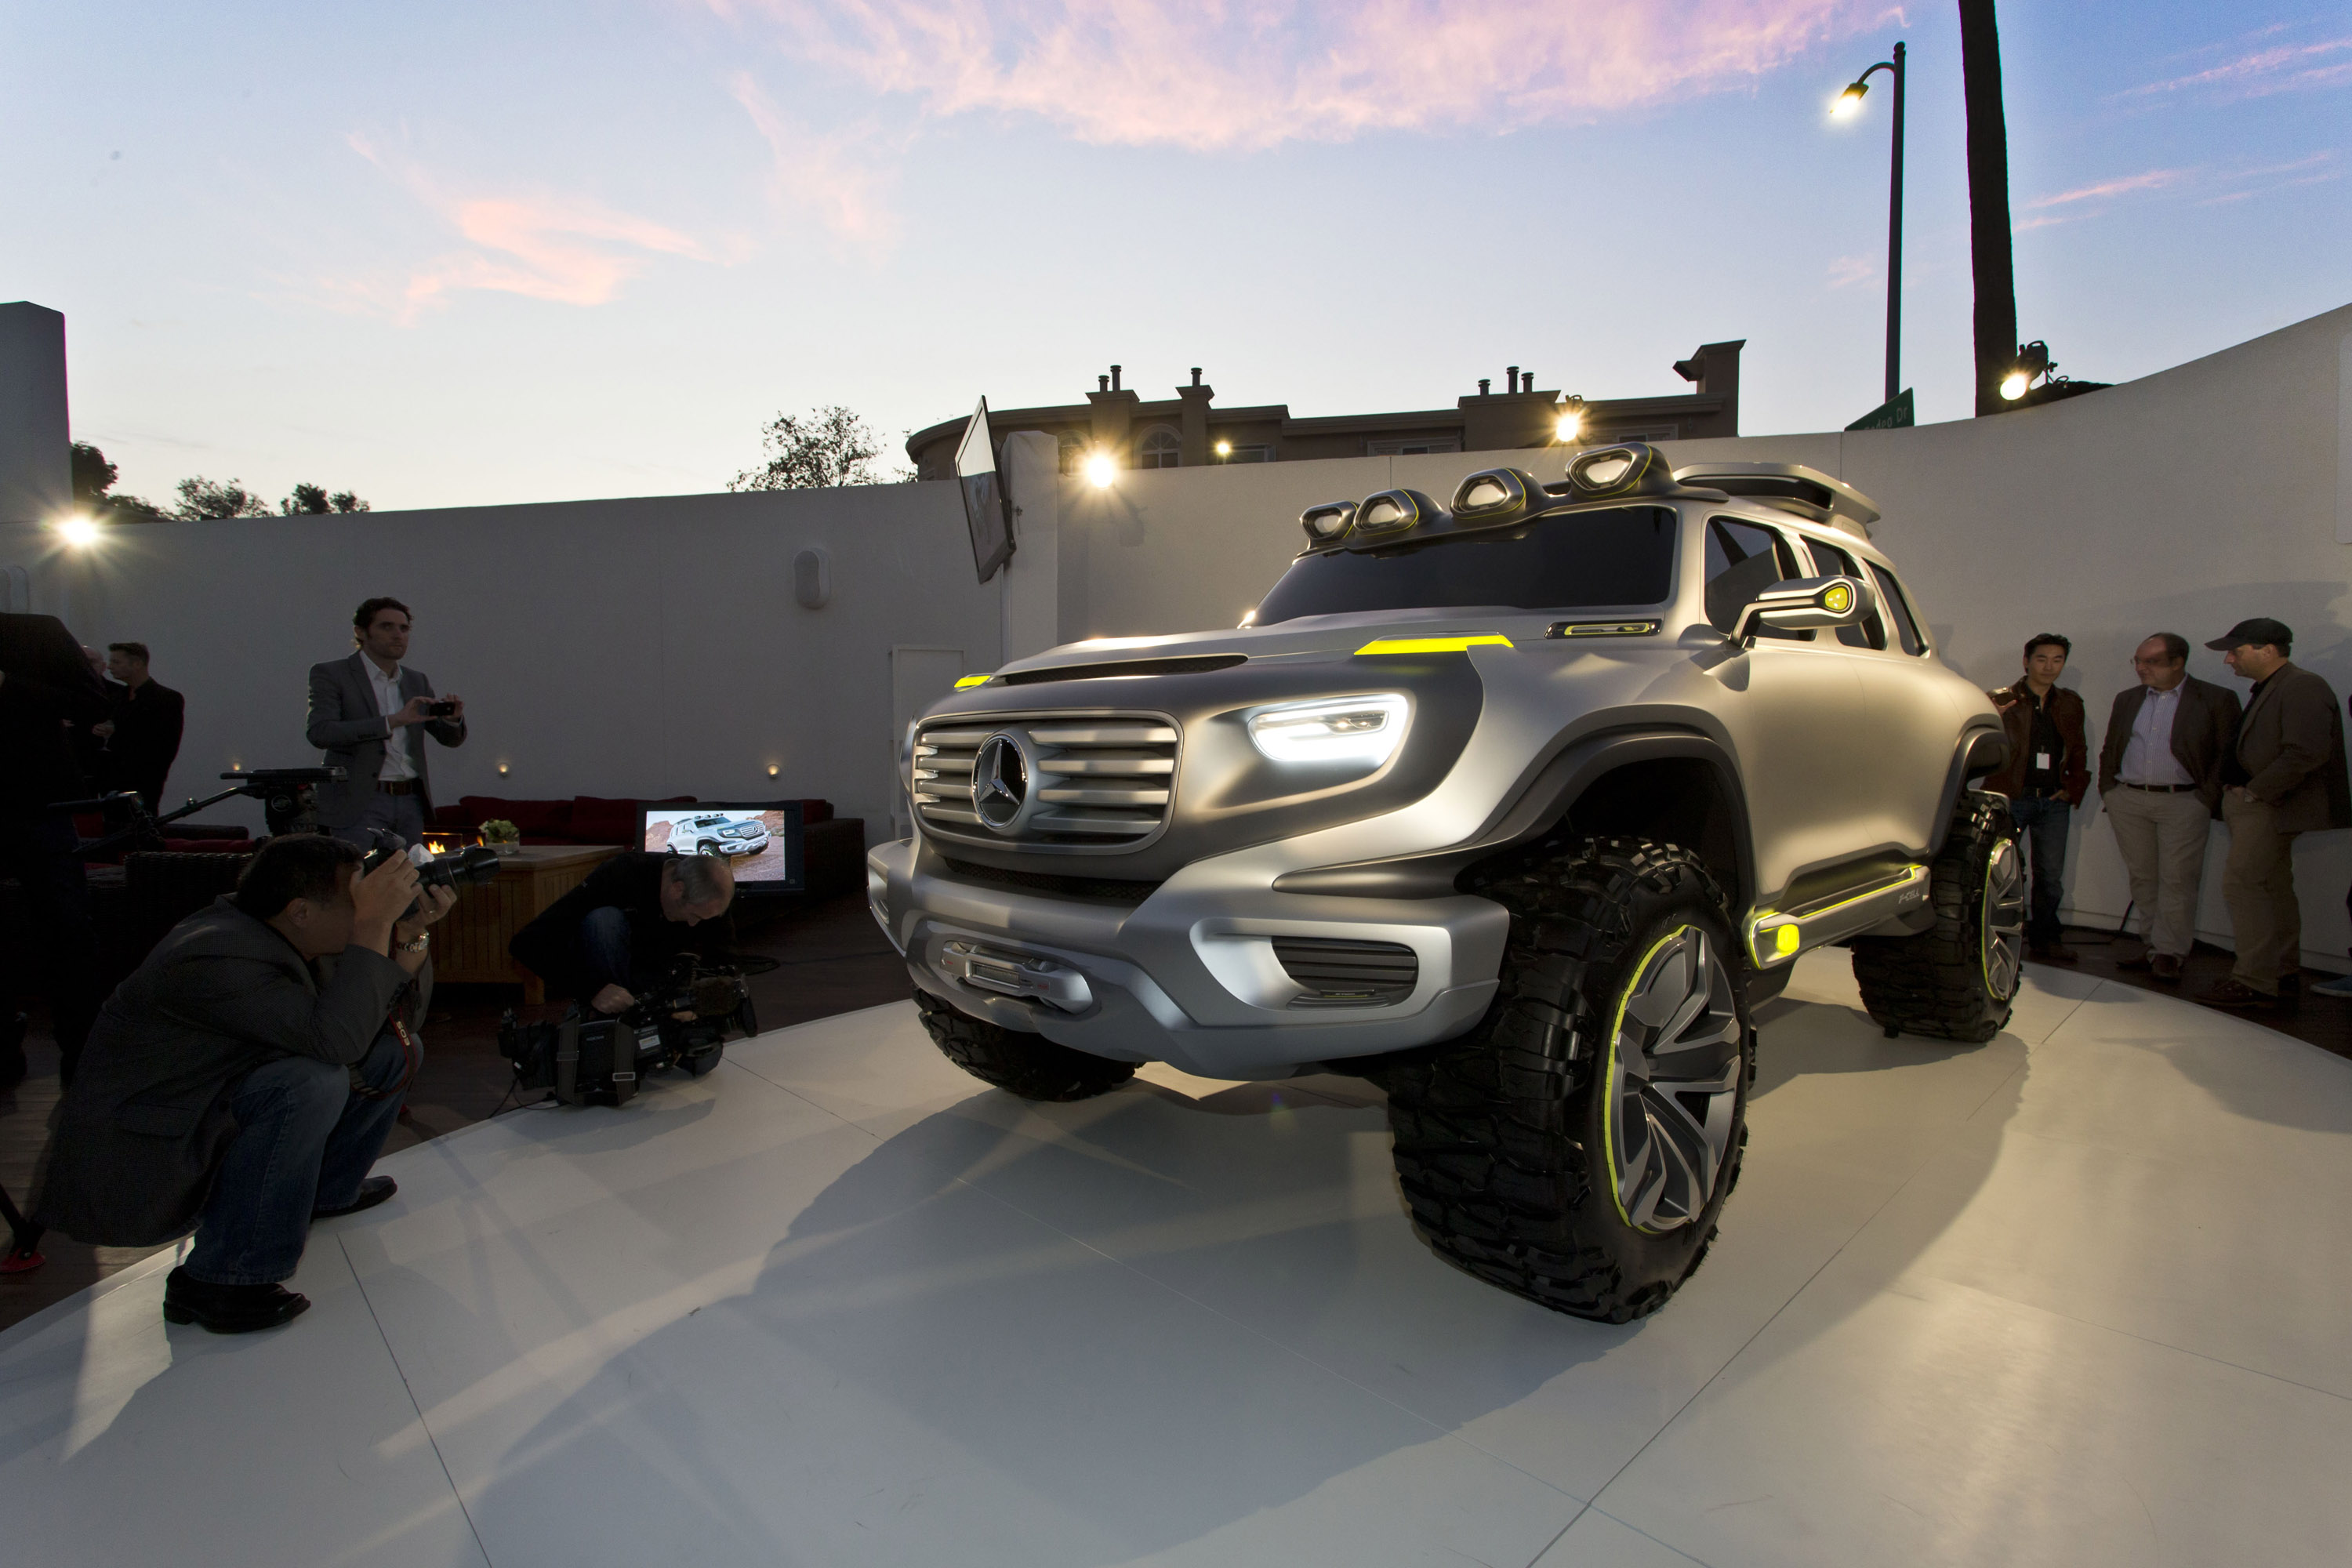 Гелендваген 2025. Mercedes-Benz Ener-g-Force. Мерседес Ener-g-Force концепт. Мерседес Ener-g-Force 2022. Mercedes-Benz Ener-g-Force Concept - 2012.